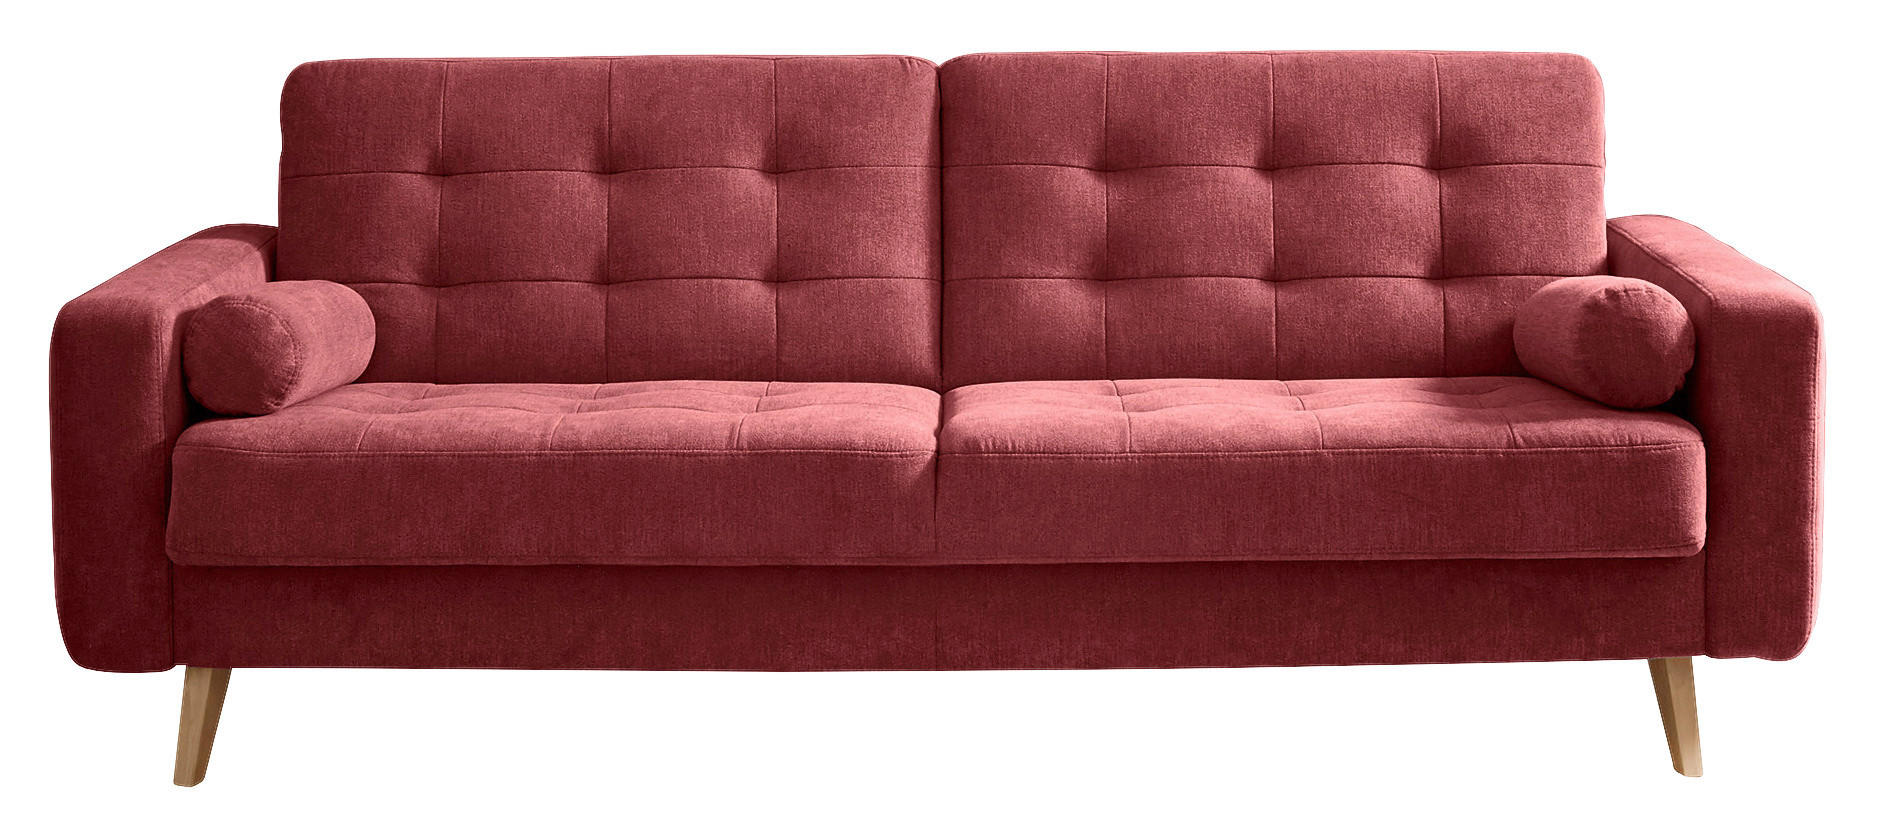 SCHLAFSOFA in Mikrovelours Beere  - Eichefarben/Beere, MODERN, Holz/Textil (222/86/90cm) - MID.YOU